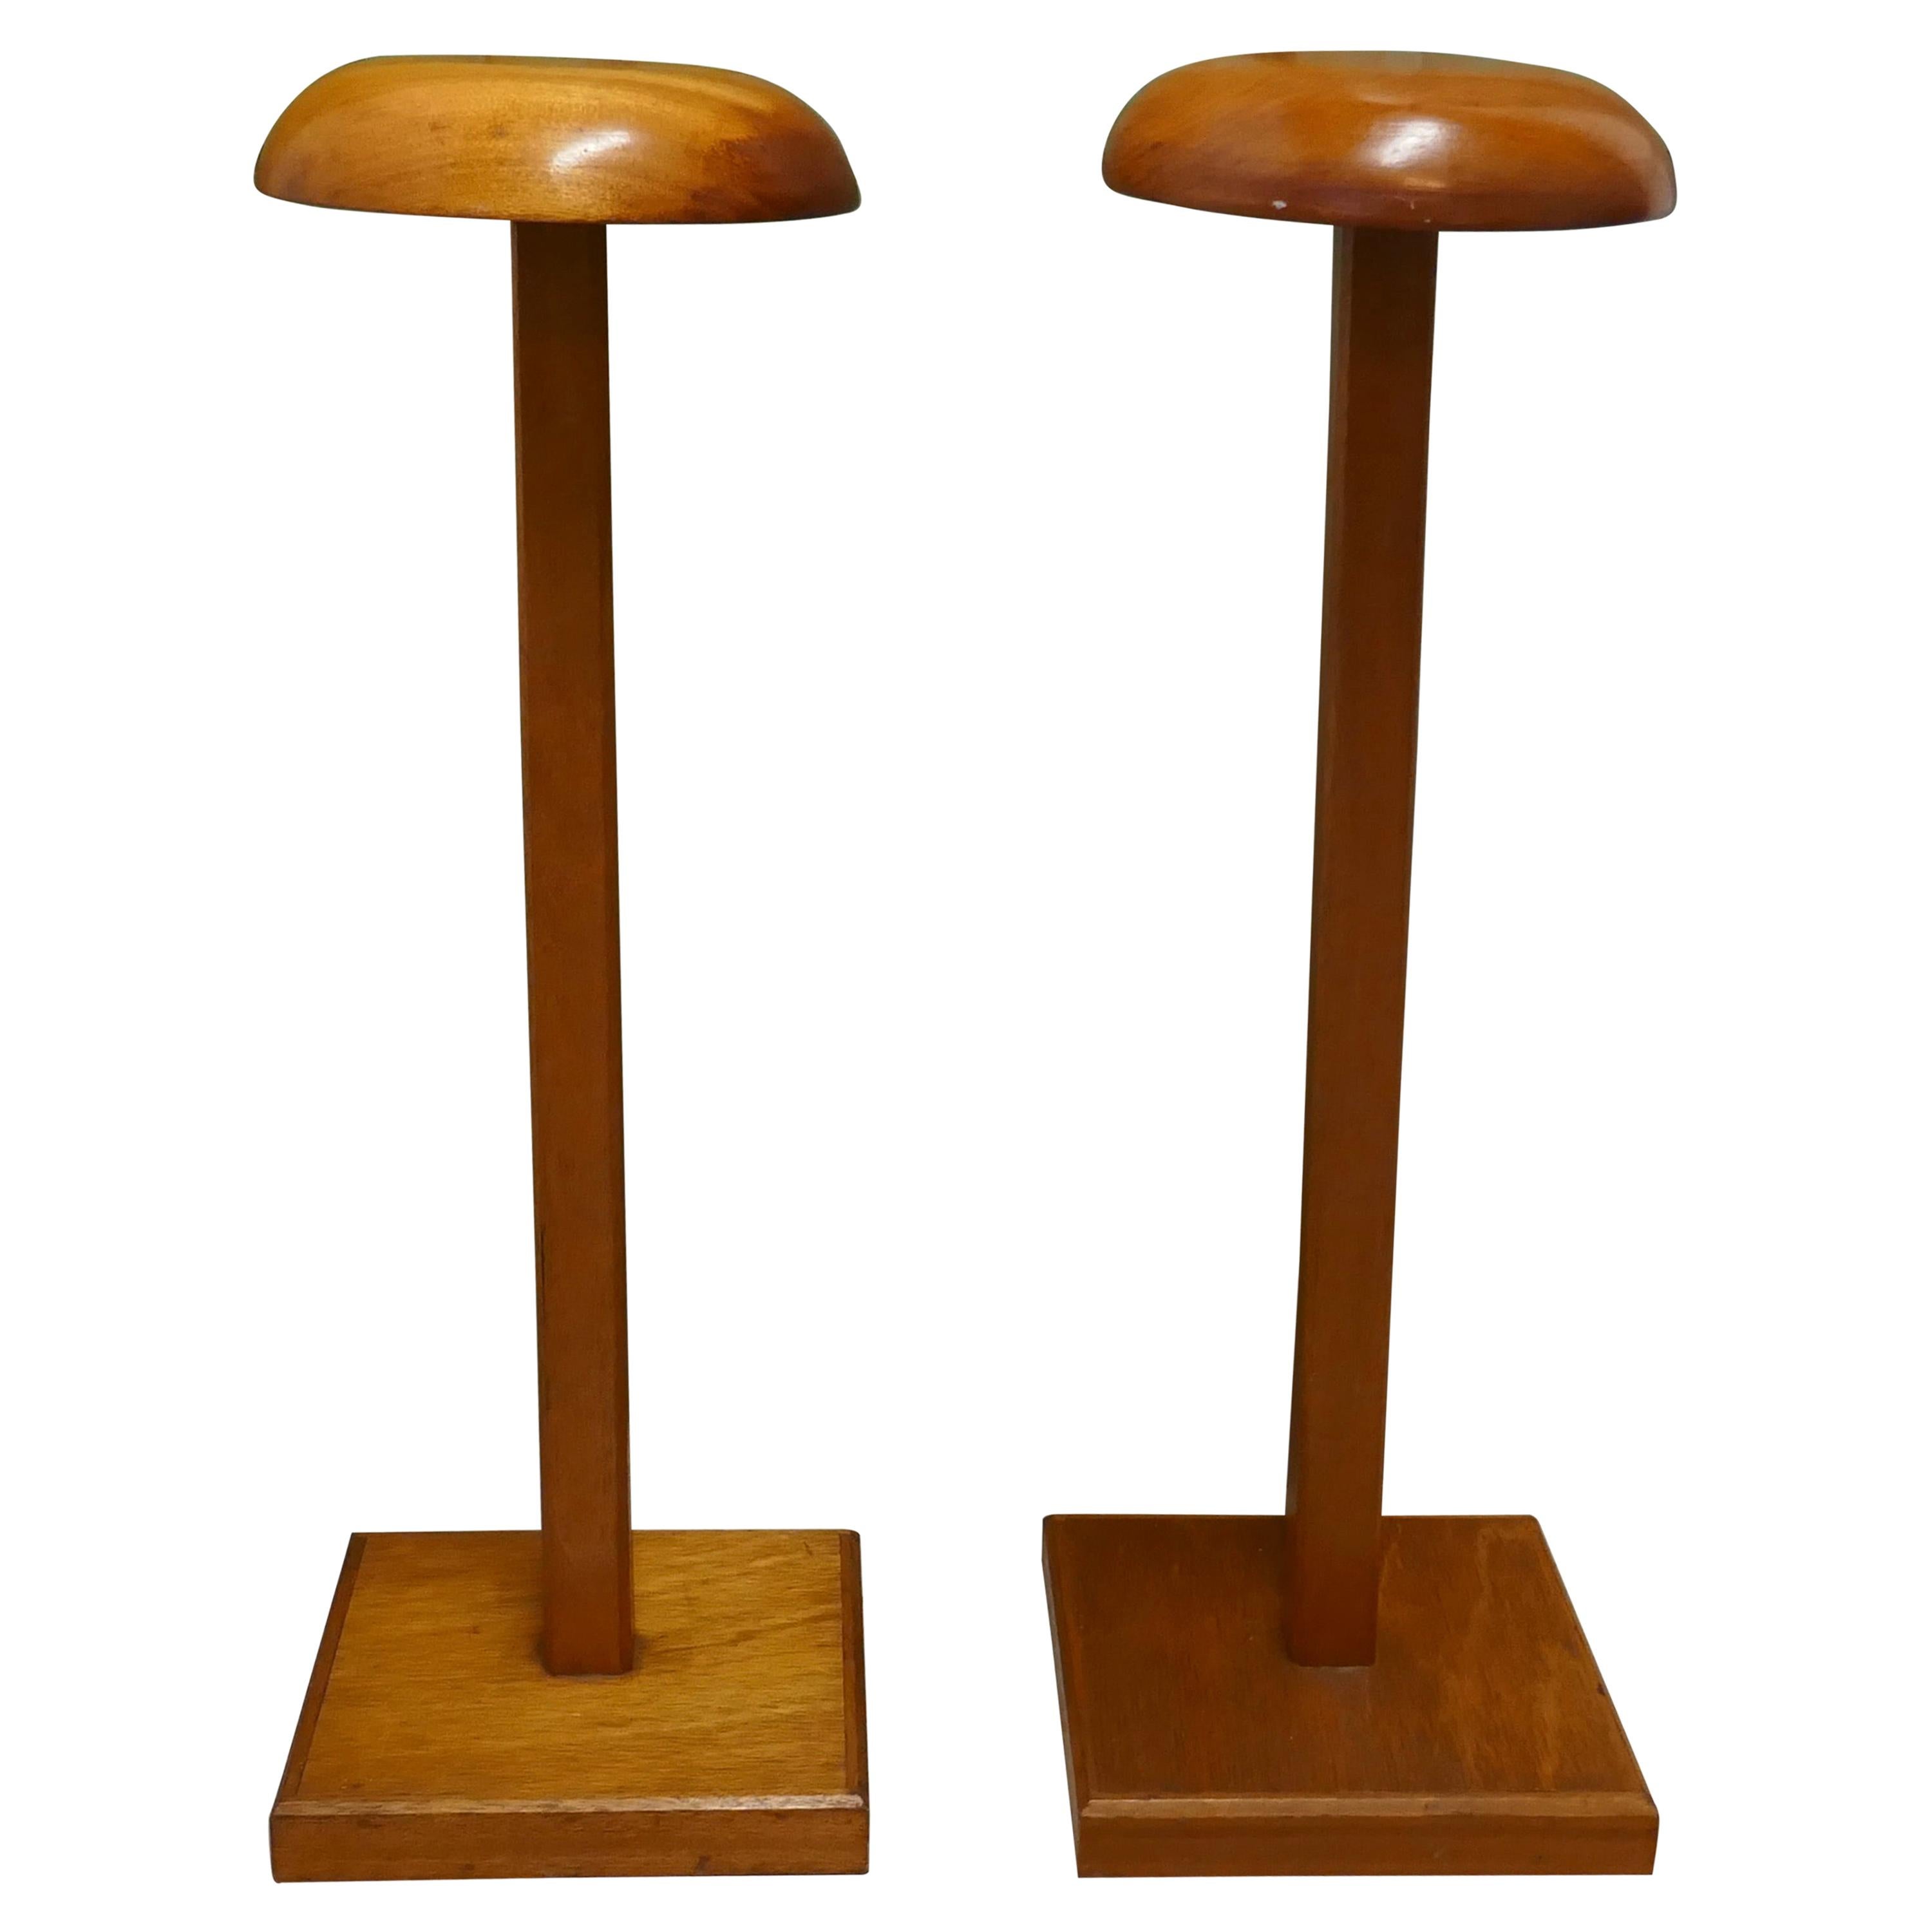 Taylor’s Wooden Fabric Display Stands For Sale